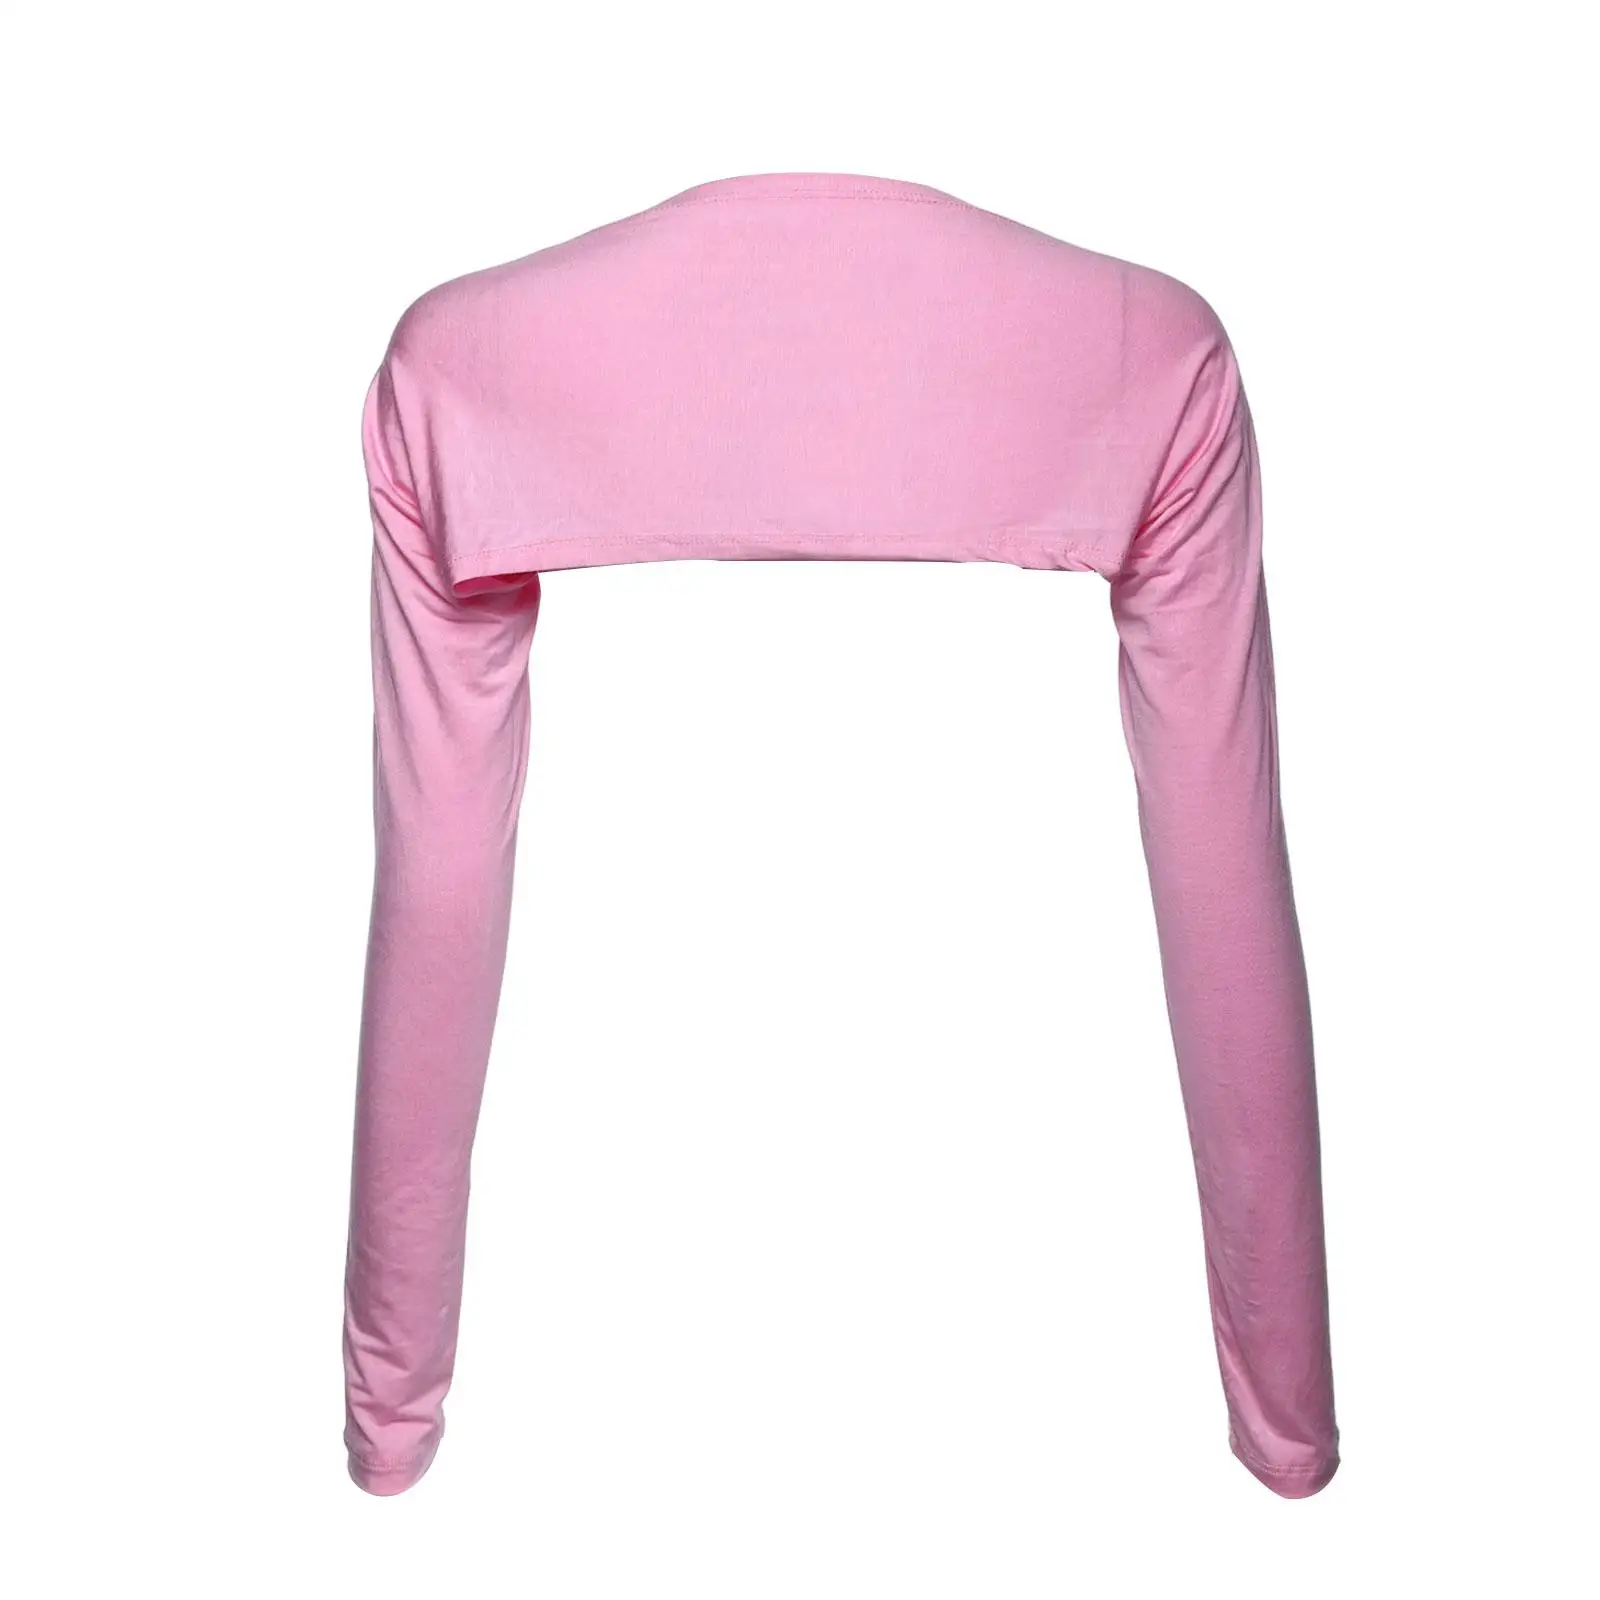 Sleeve Shawl Shawl arms sleeves Sleeves to Cover Arms for Golf Sports Ladies